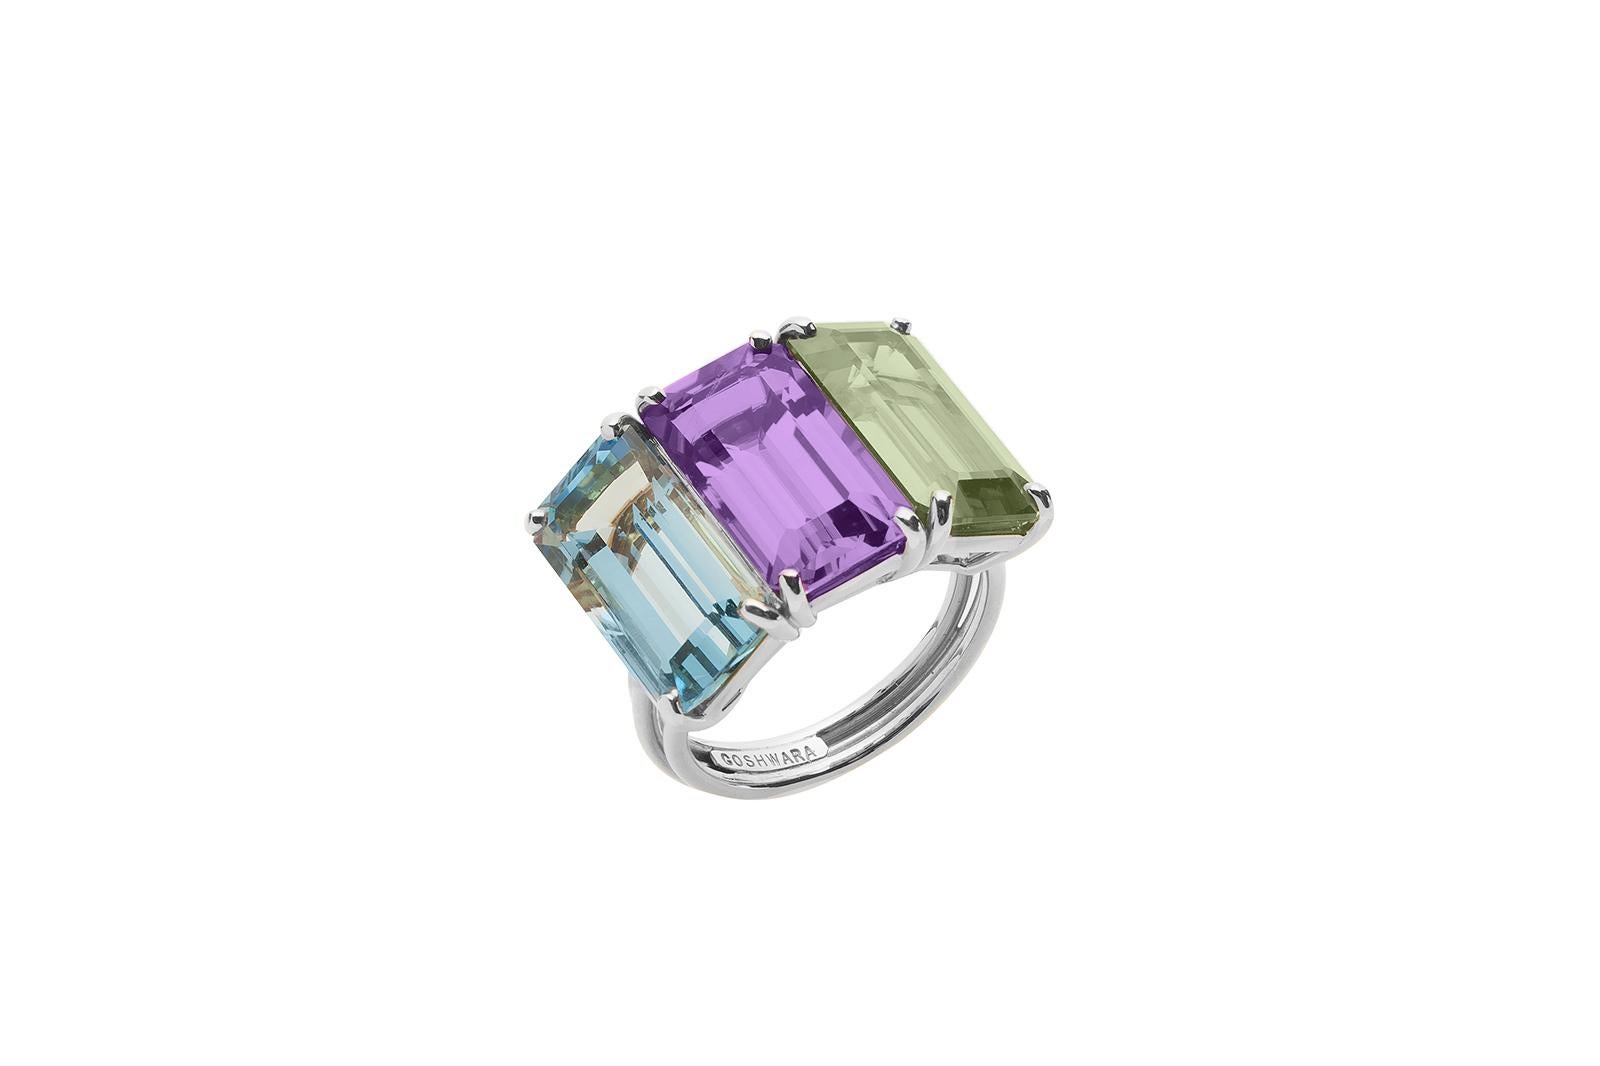 Three stone Emerald Cut, Blue Topaz, Amethyst and Prasiolite Ring in 18K White Gold from 'Gossip' Collection

 Stone Size: 13 x 7 mm

Gemstone Approx. Wt. Blue Topaz- 5.10 Carats
                                      Prasiollite- 3.37 Carats 
      